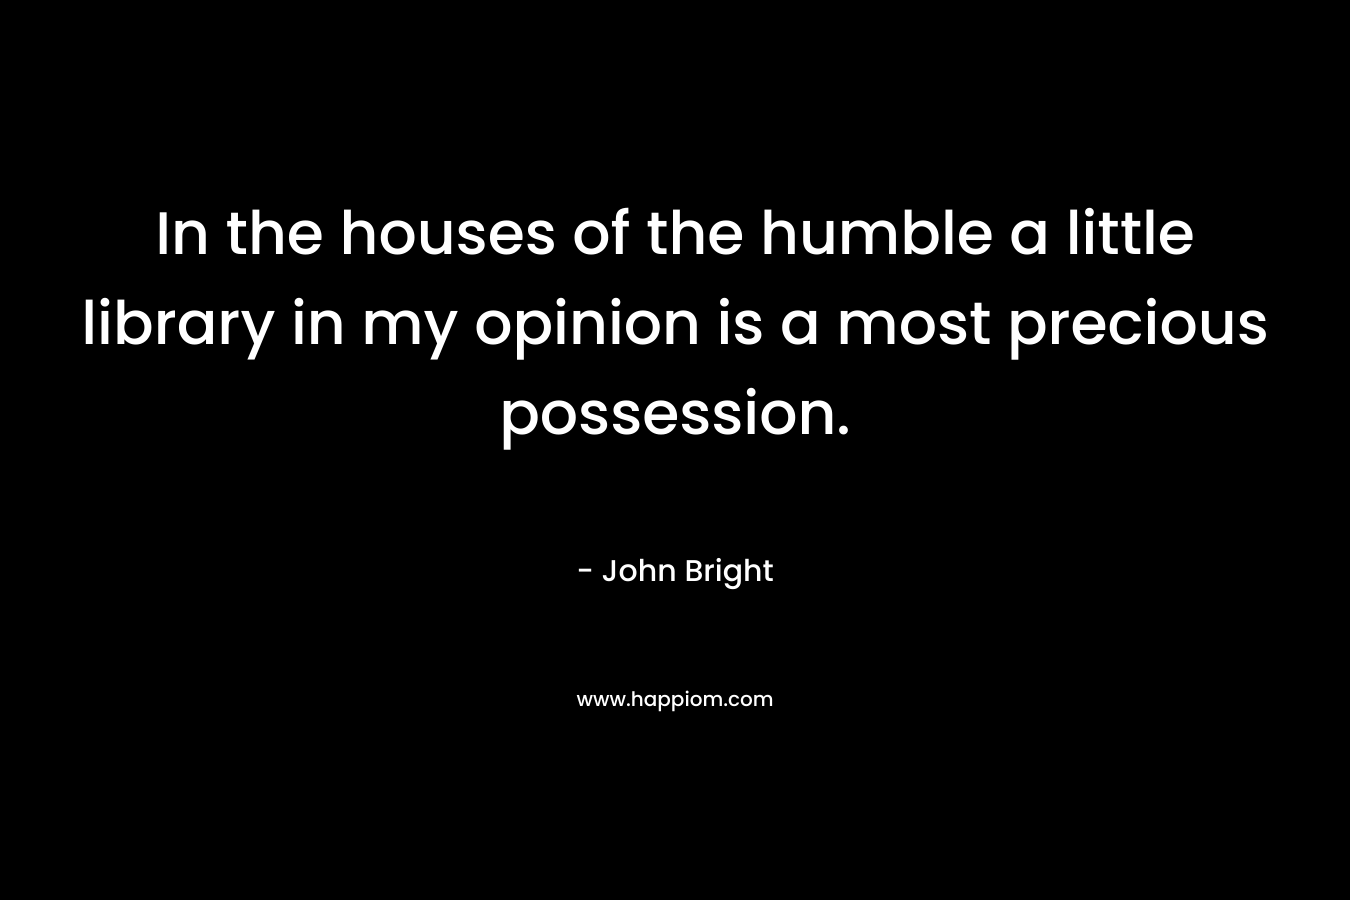 In the houses of the humble a little library in my opinion is a most precious possession. – John Bright